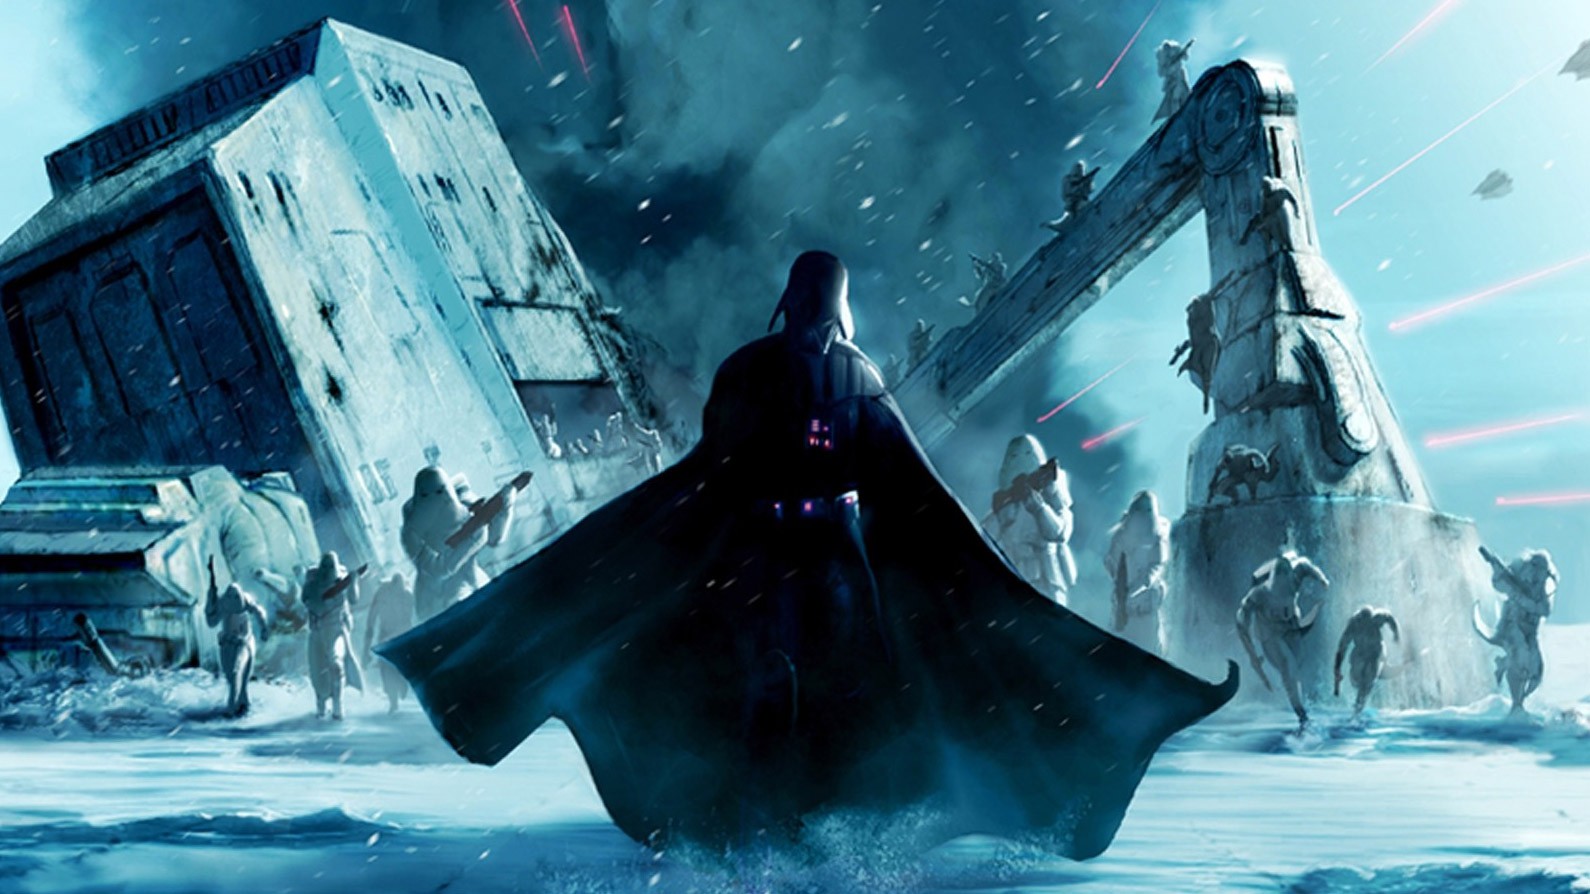 General 1590x894 Star Wars Darth Vader Imperial Forces Sith snow artwork Star Wars Villains Hoth battle science fiction